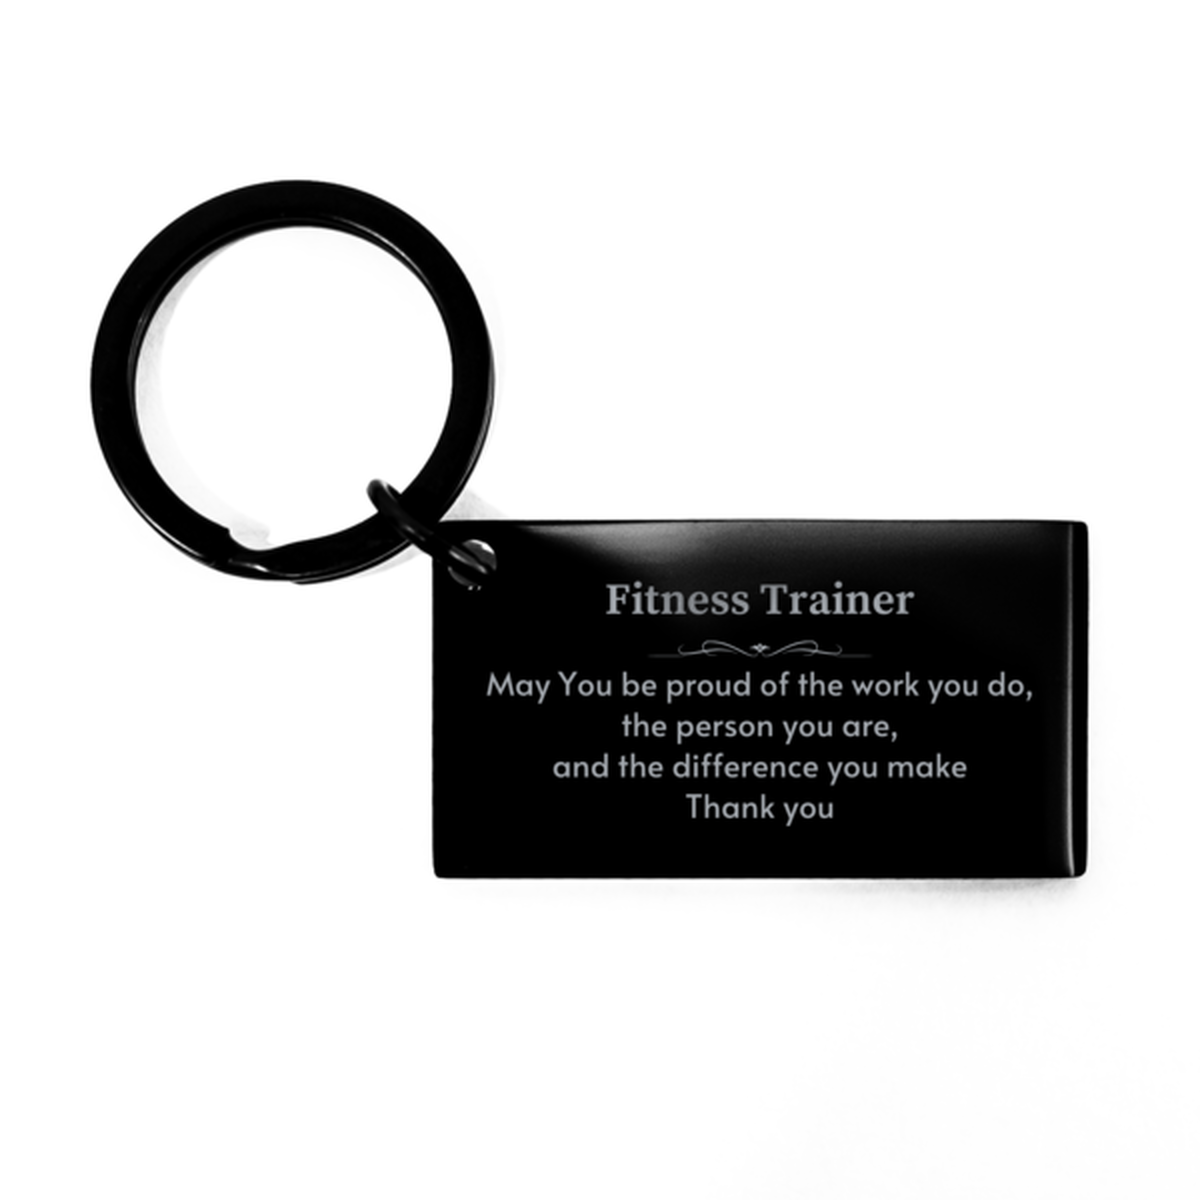 Heartwarming Keychain Retirement Coworkers Gifts for Fitness Trainer, Librarian May You be proud of the work you do, the person you are Gifts for Boss Men Women Friends